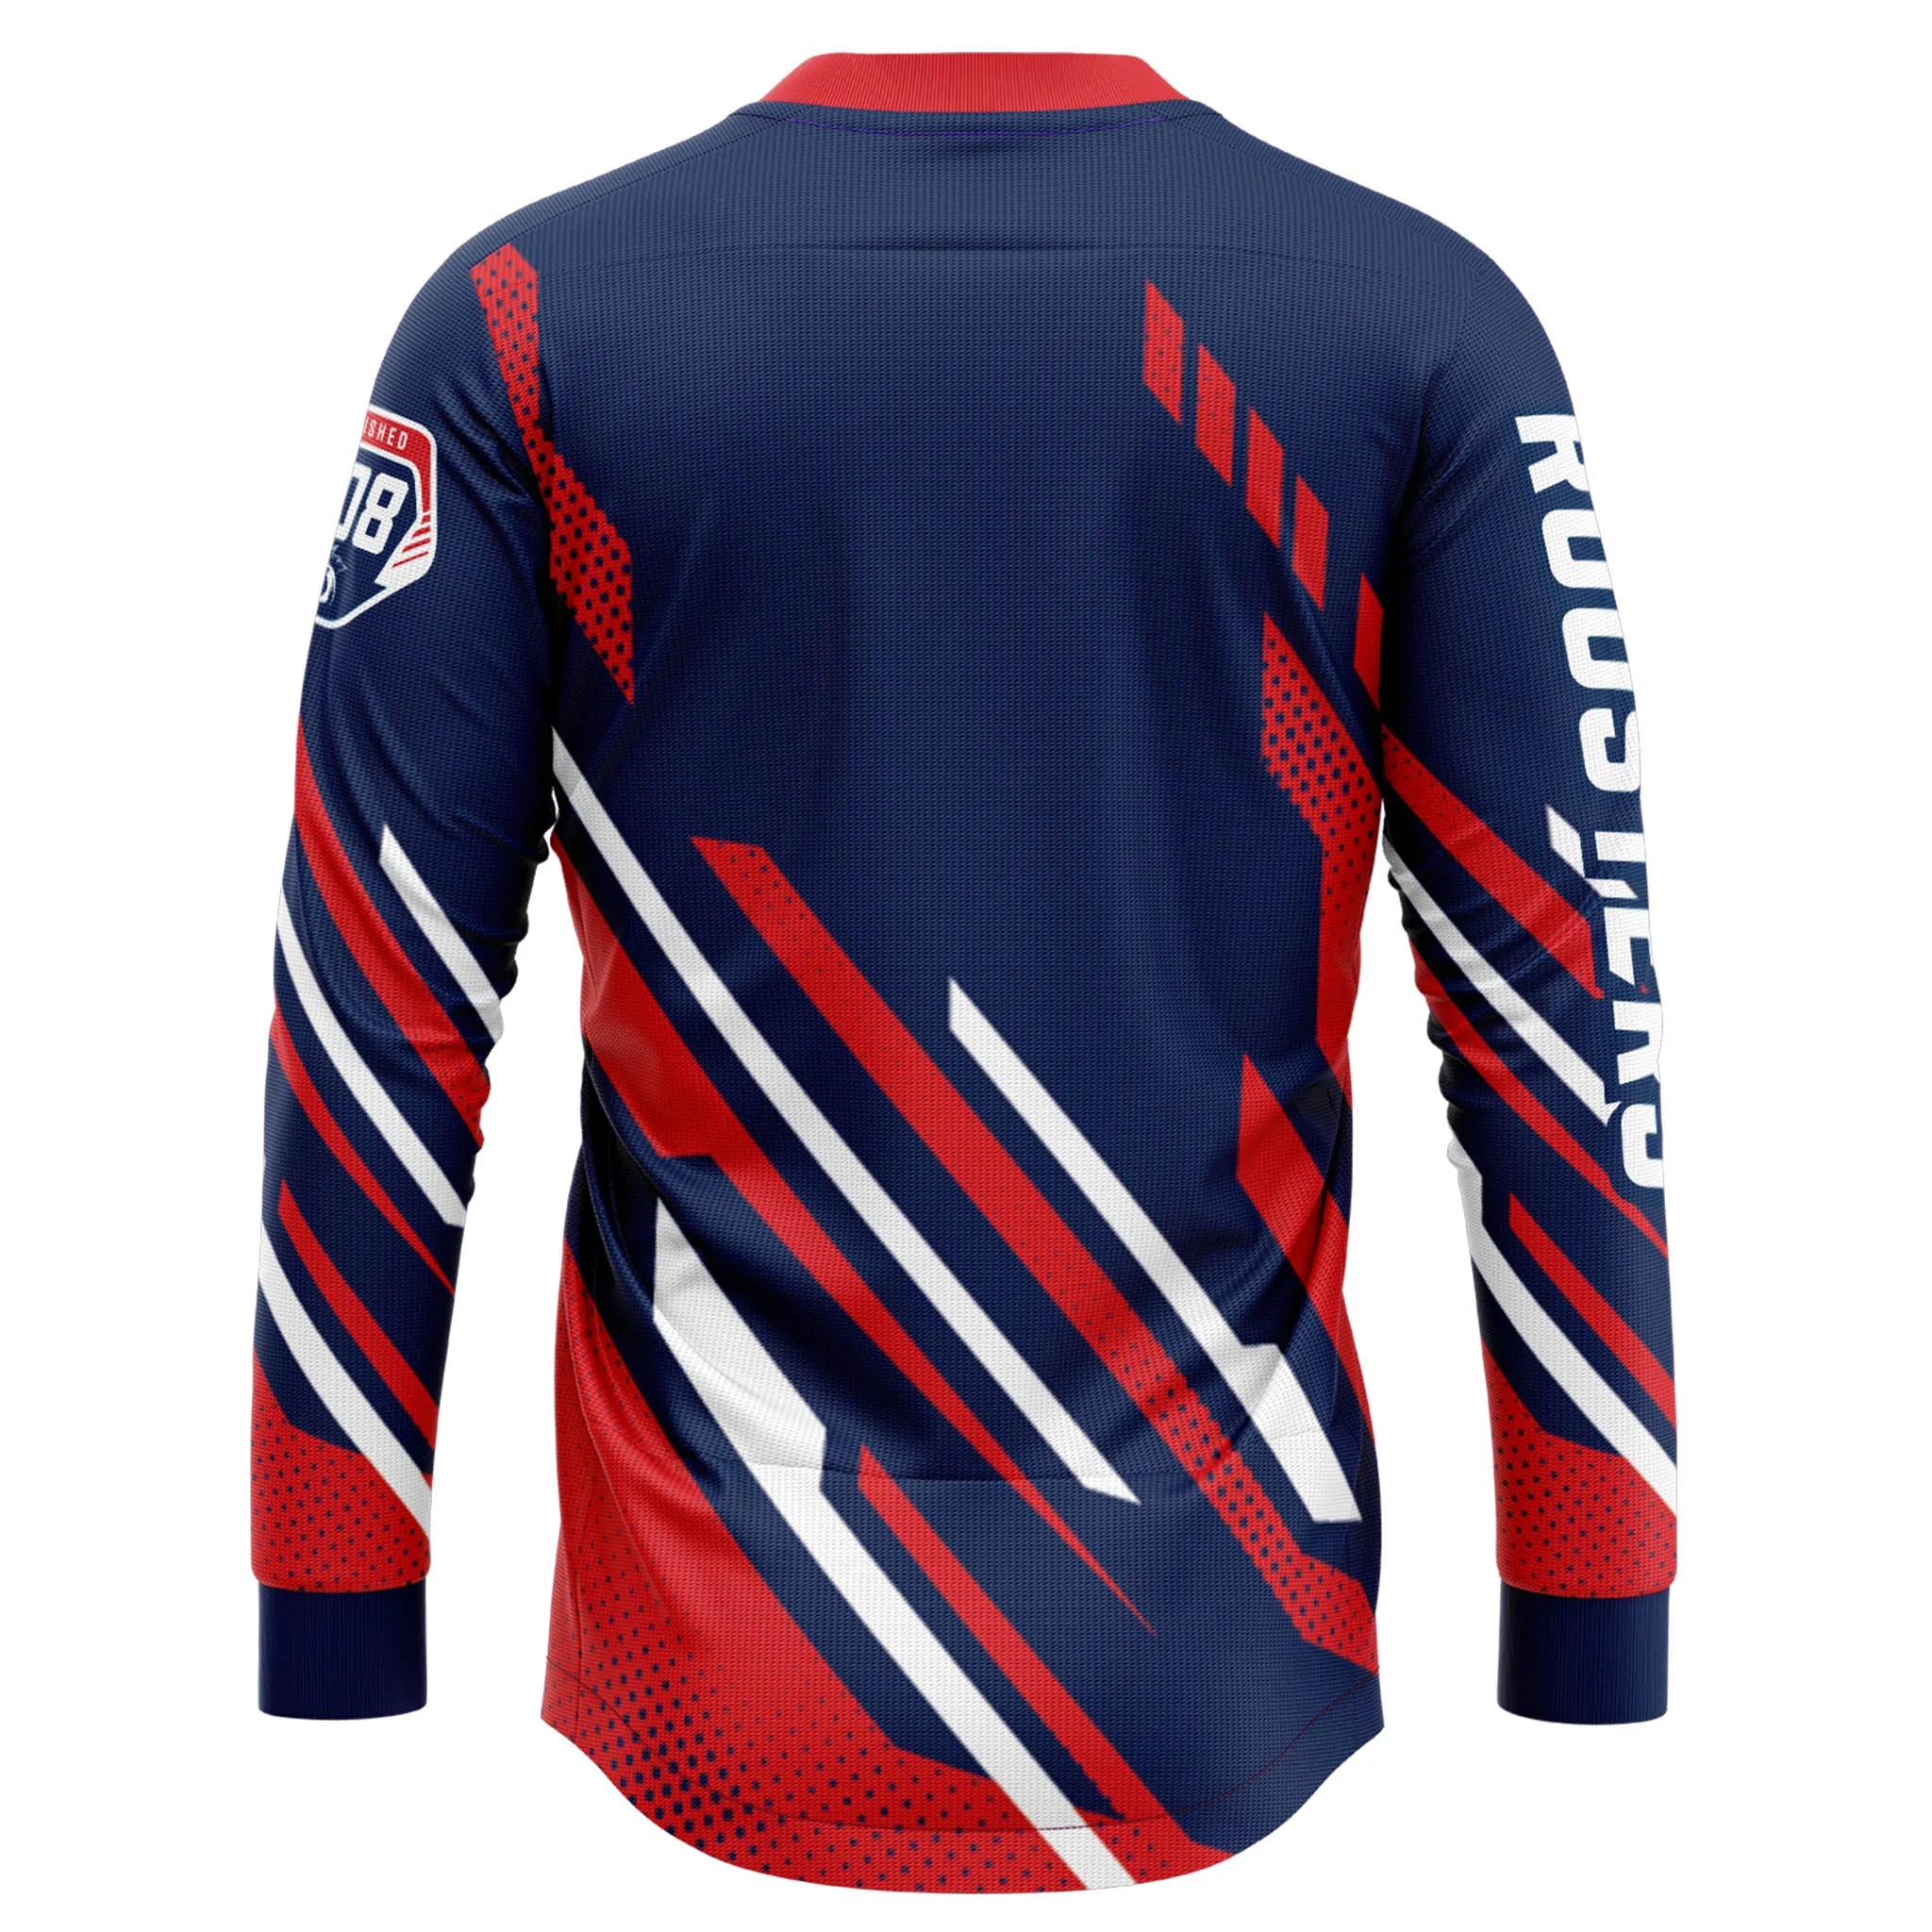 Roosters Blitz MX Jersey - The Rugby Shop Darwin